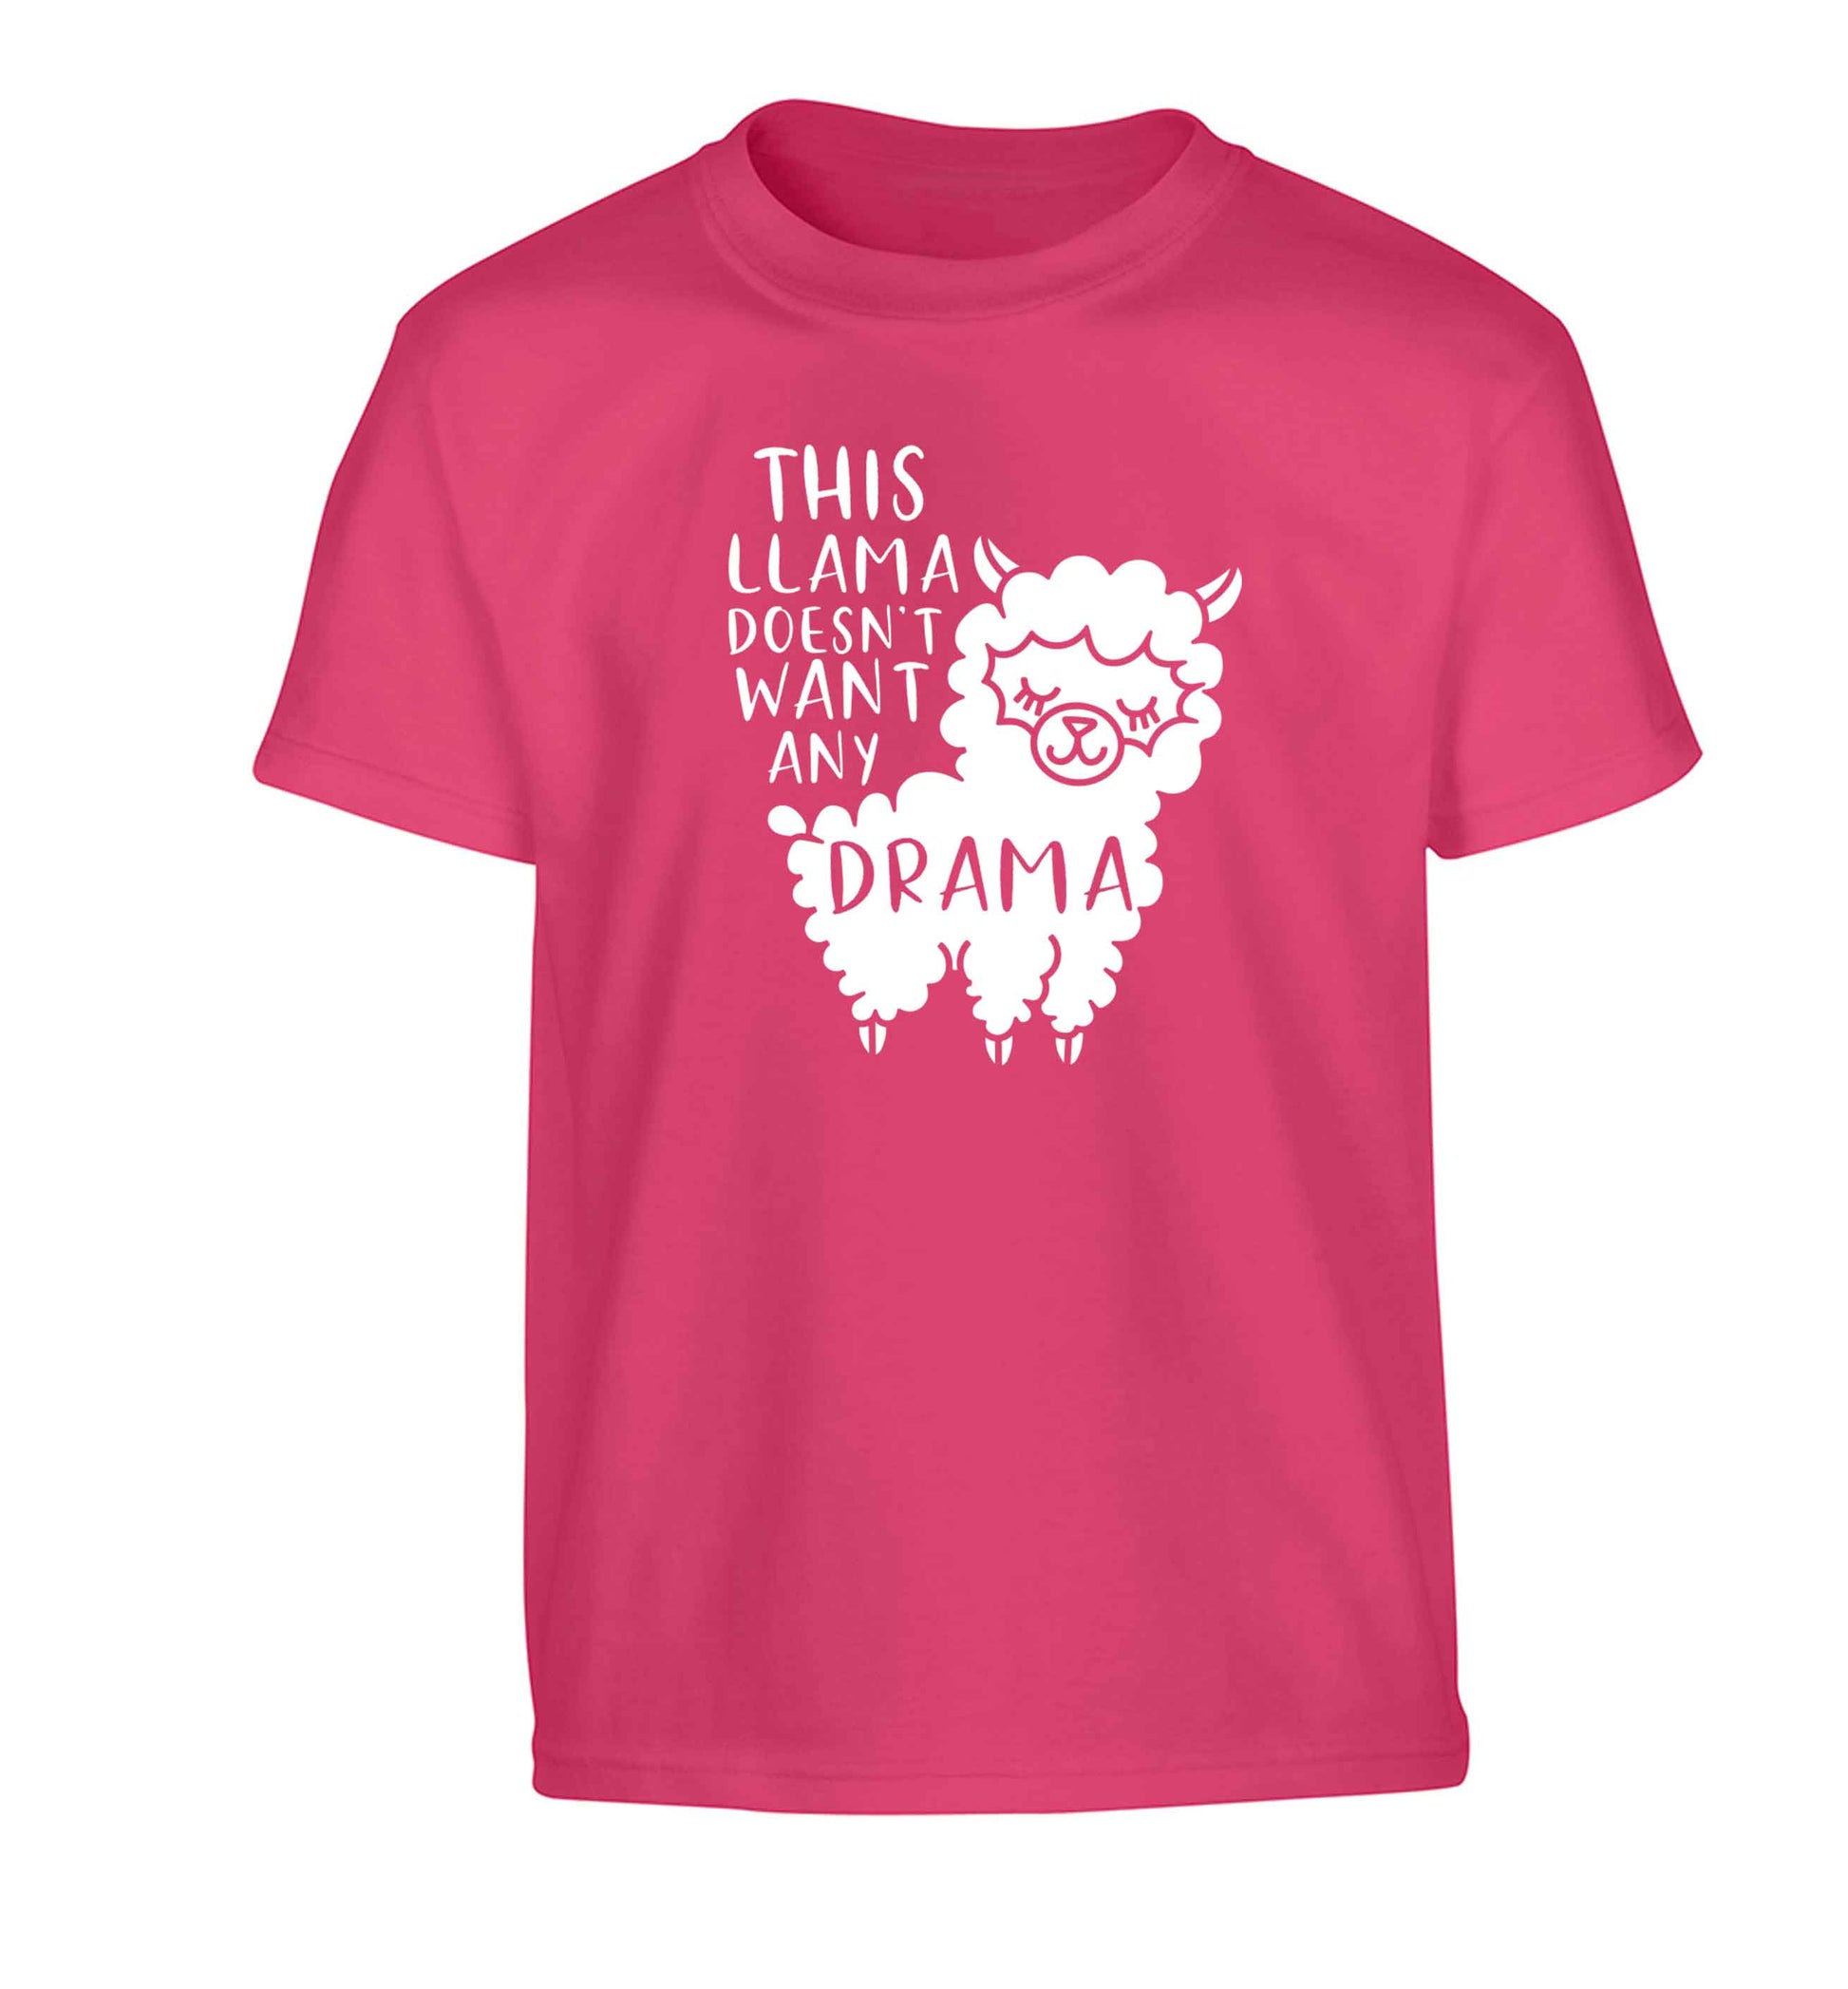 This Llama doesn't want any drama Children's pink Tshirt 12-13 Years